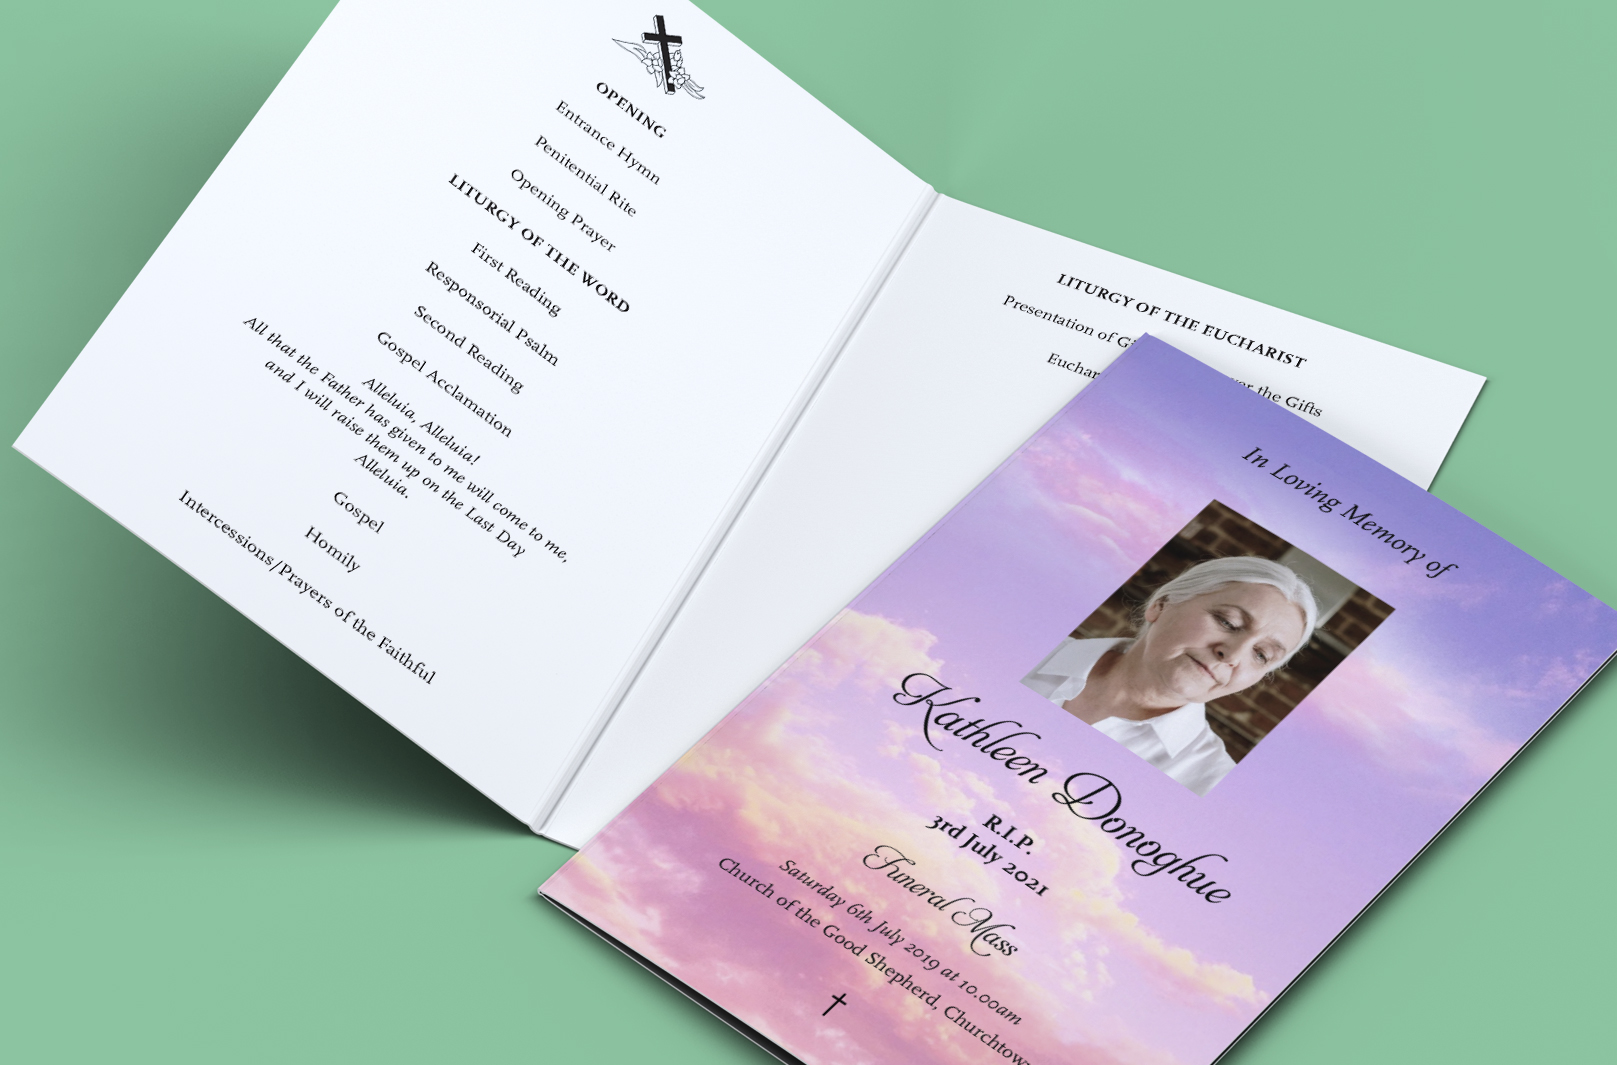 Order of Service Sheets from Print Ready Dublin